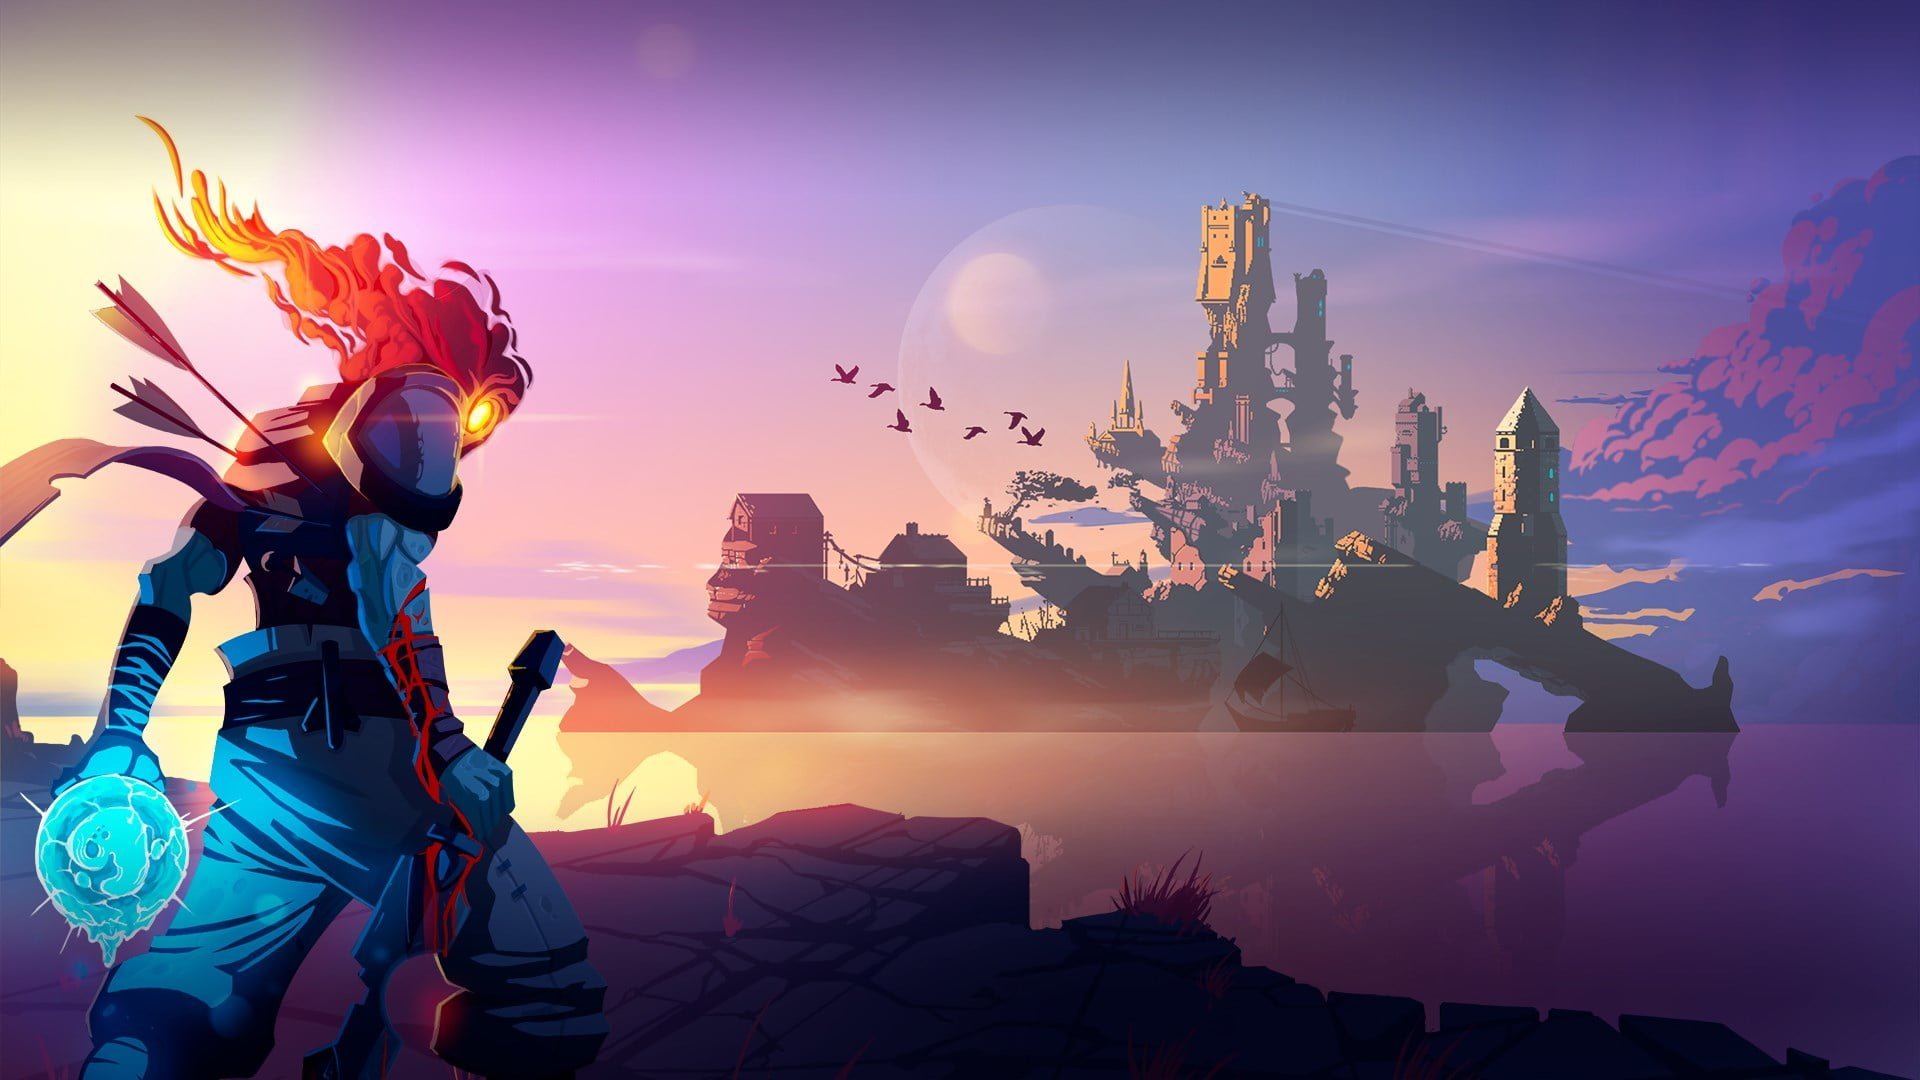 Dead Cells Legacy Update na Androida